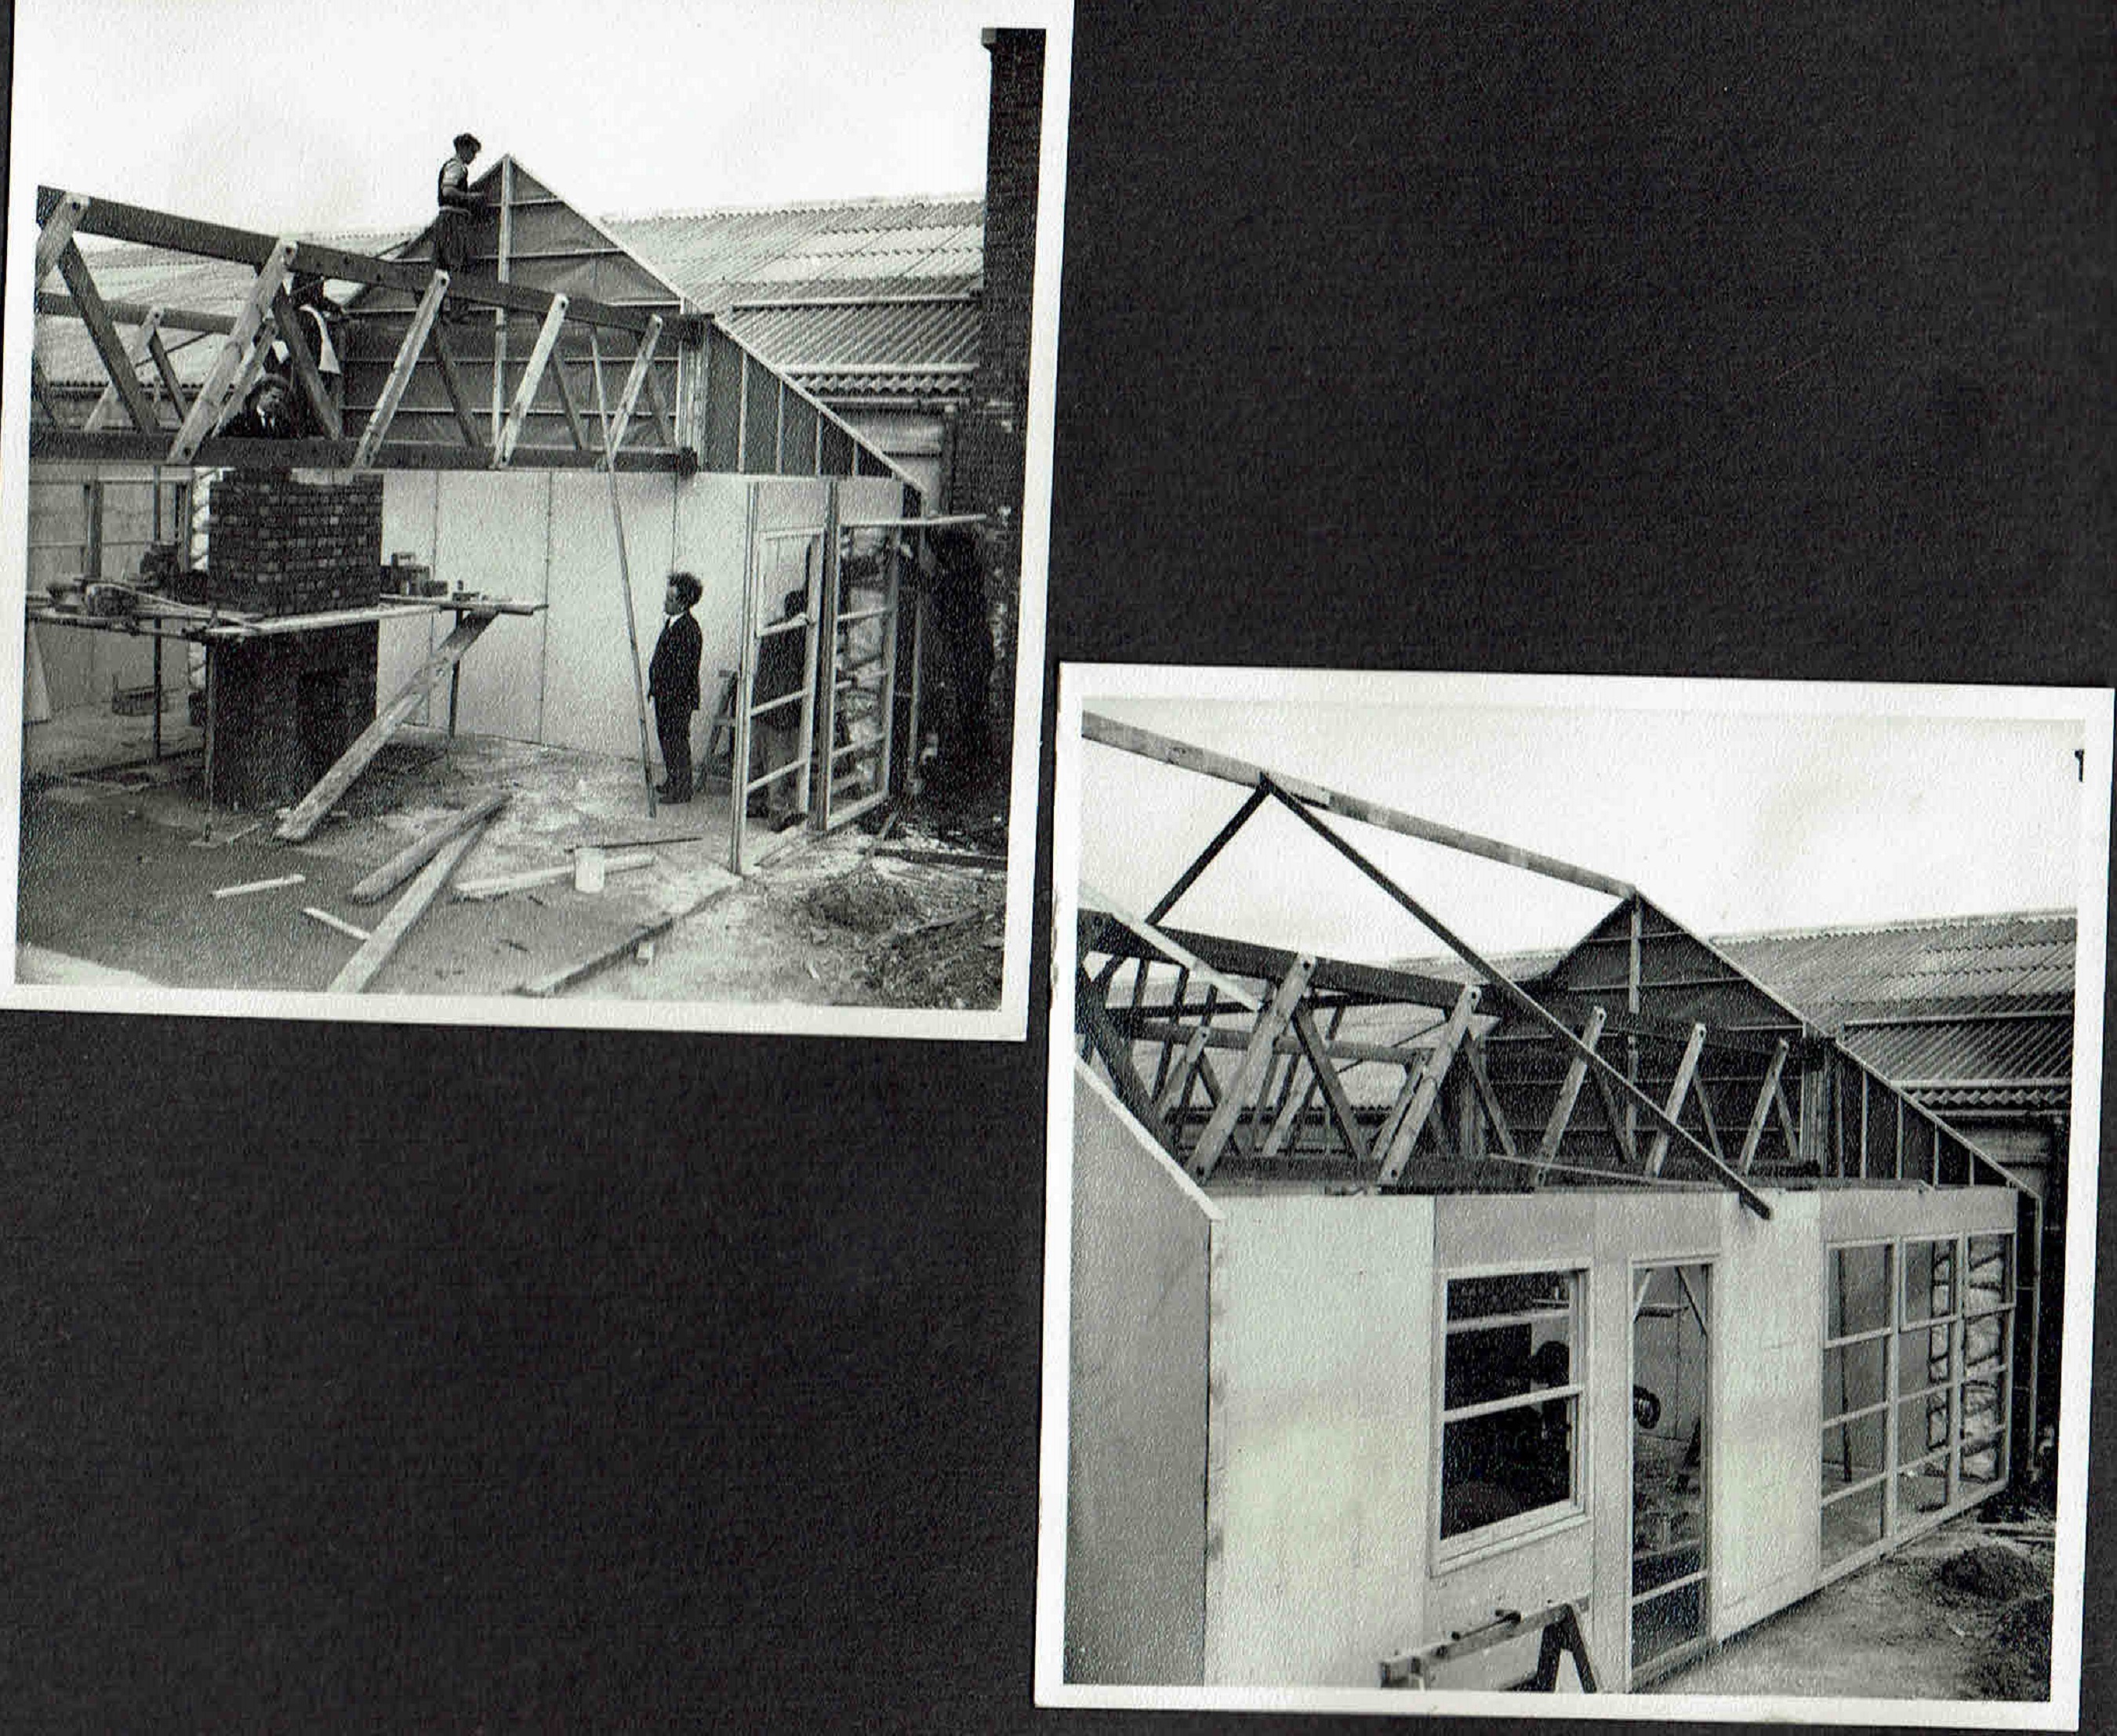 Personal photograph album of a prefabricated timber framed bungalow under construction